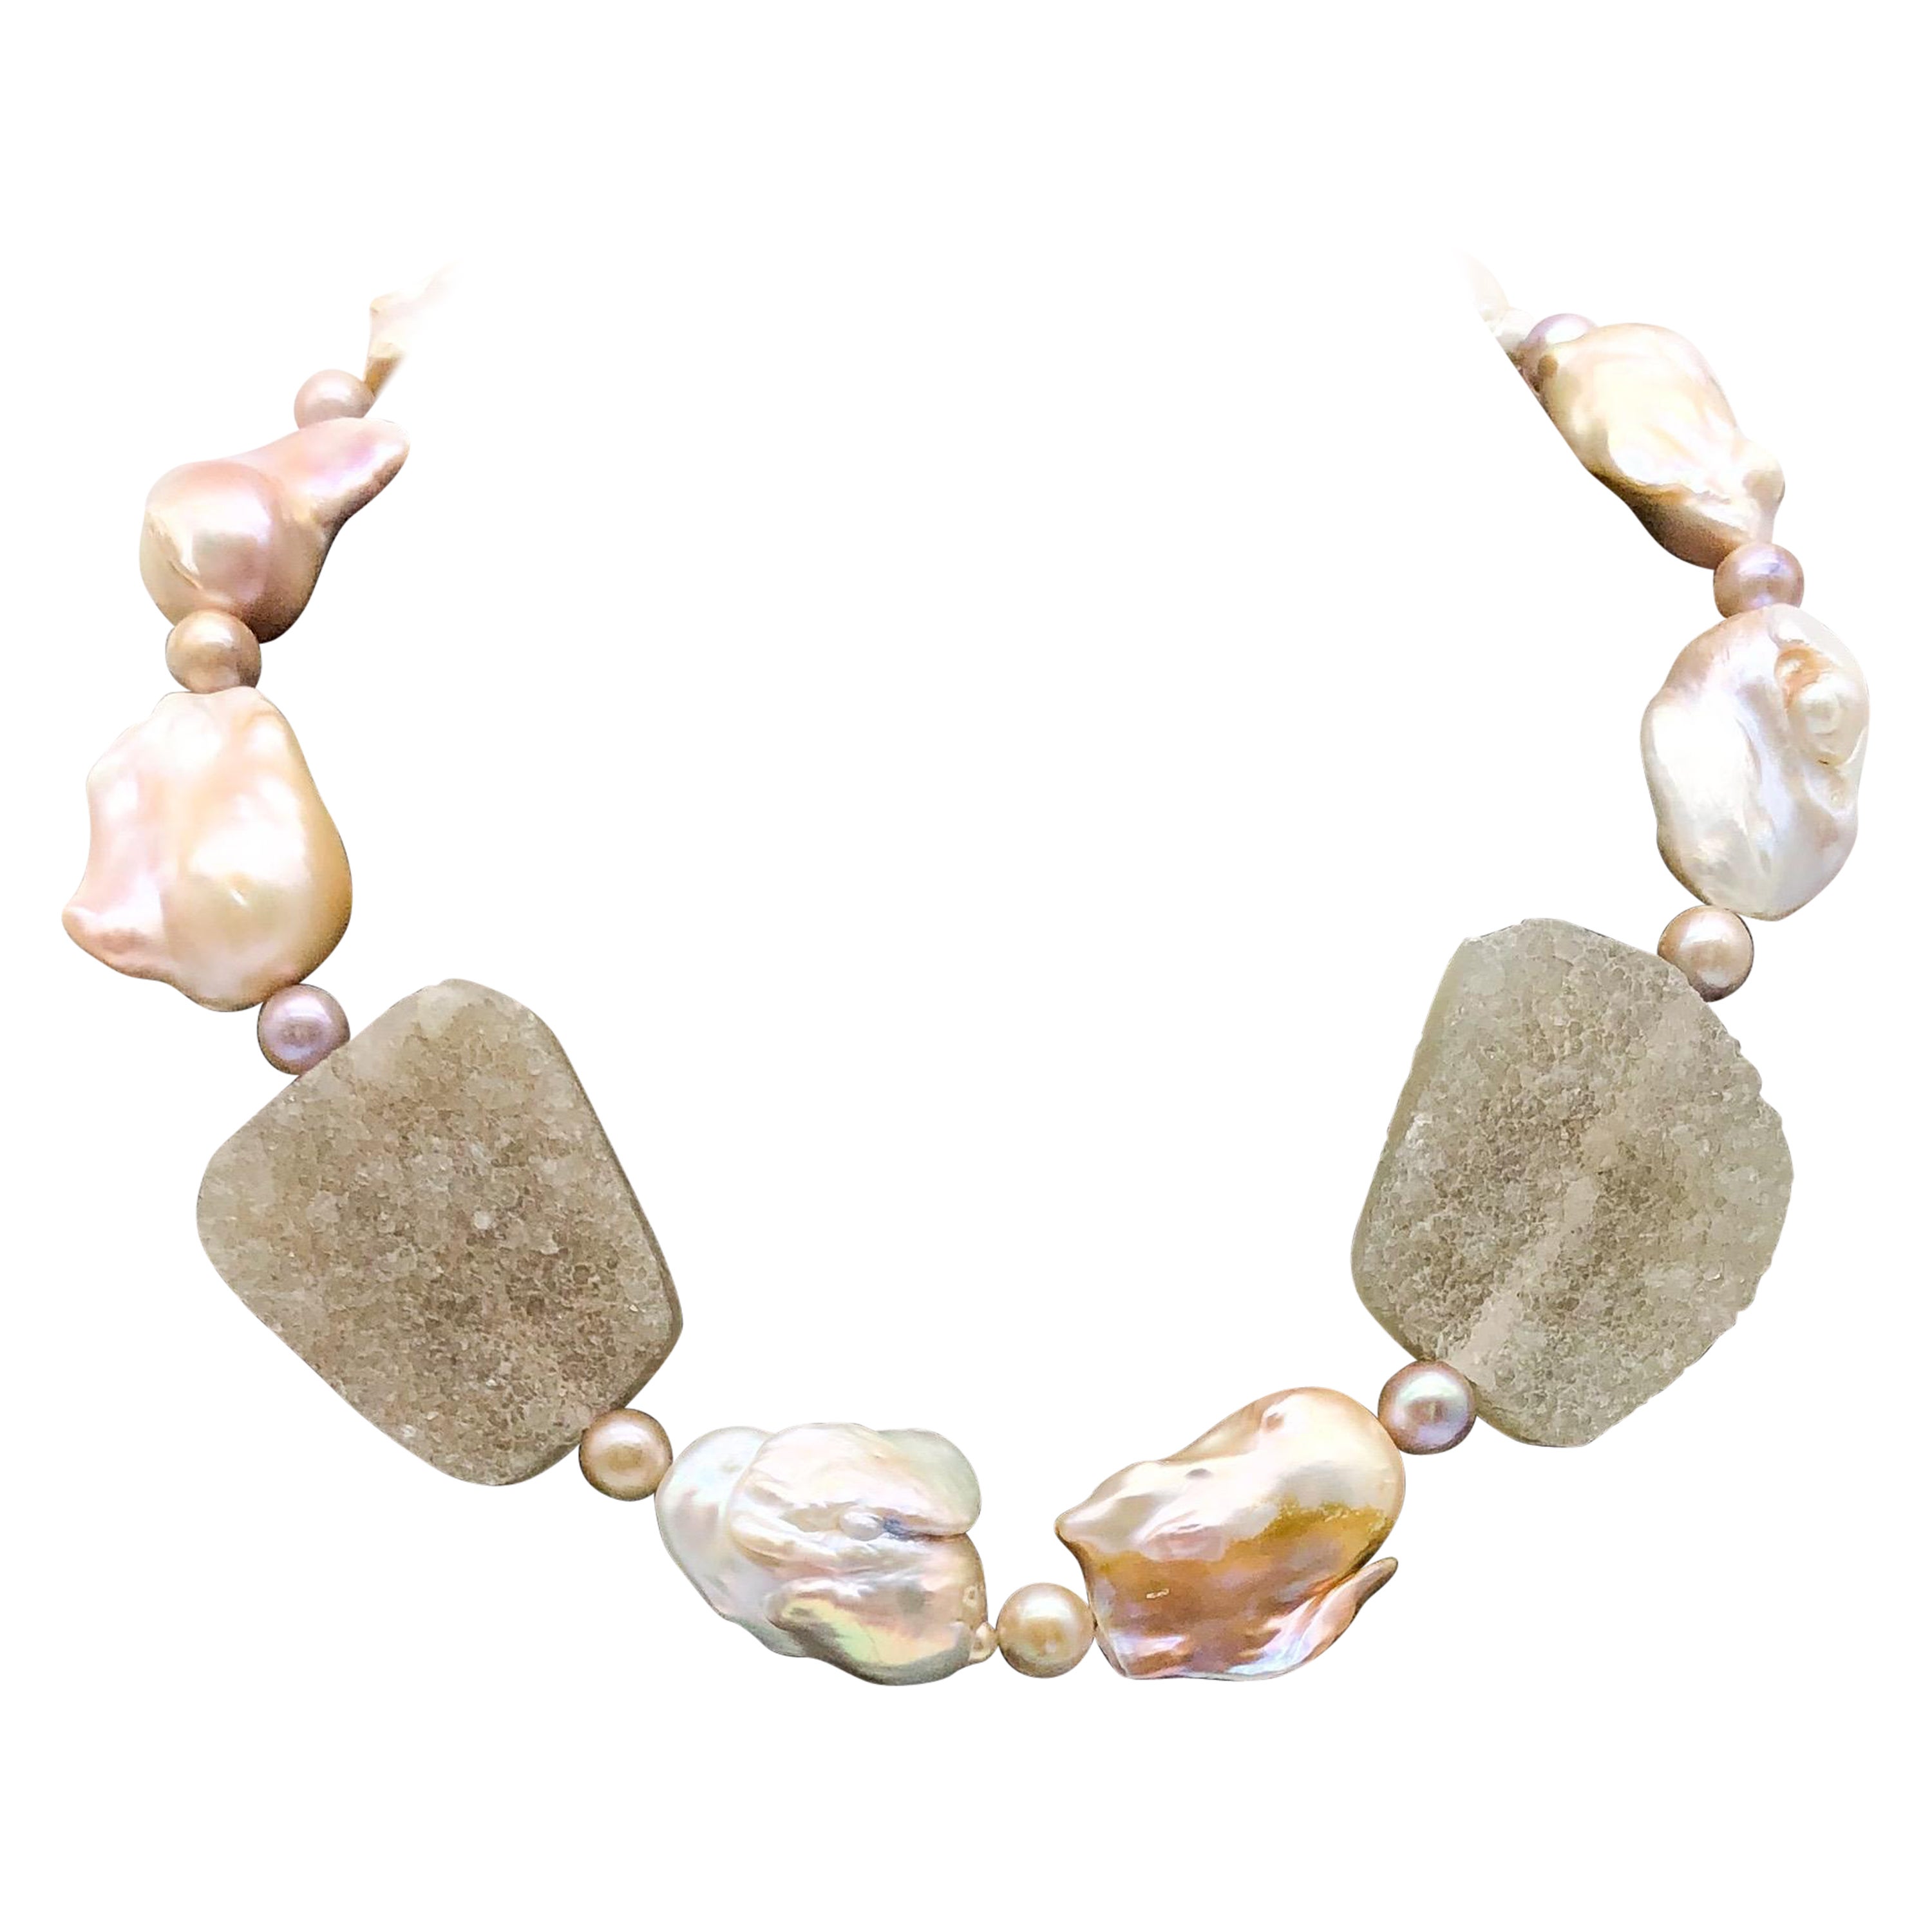 A.Jeschel Statement Baroque Pearl Necklace. For Sale